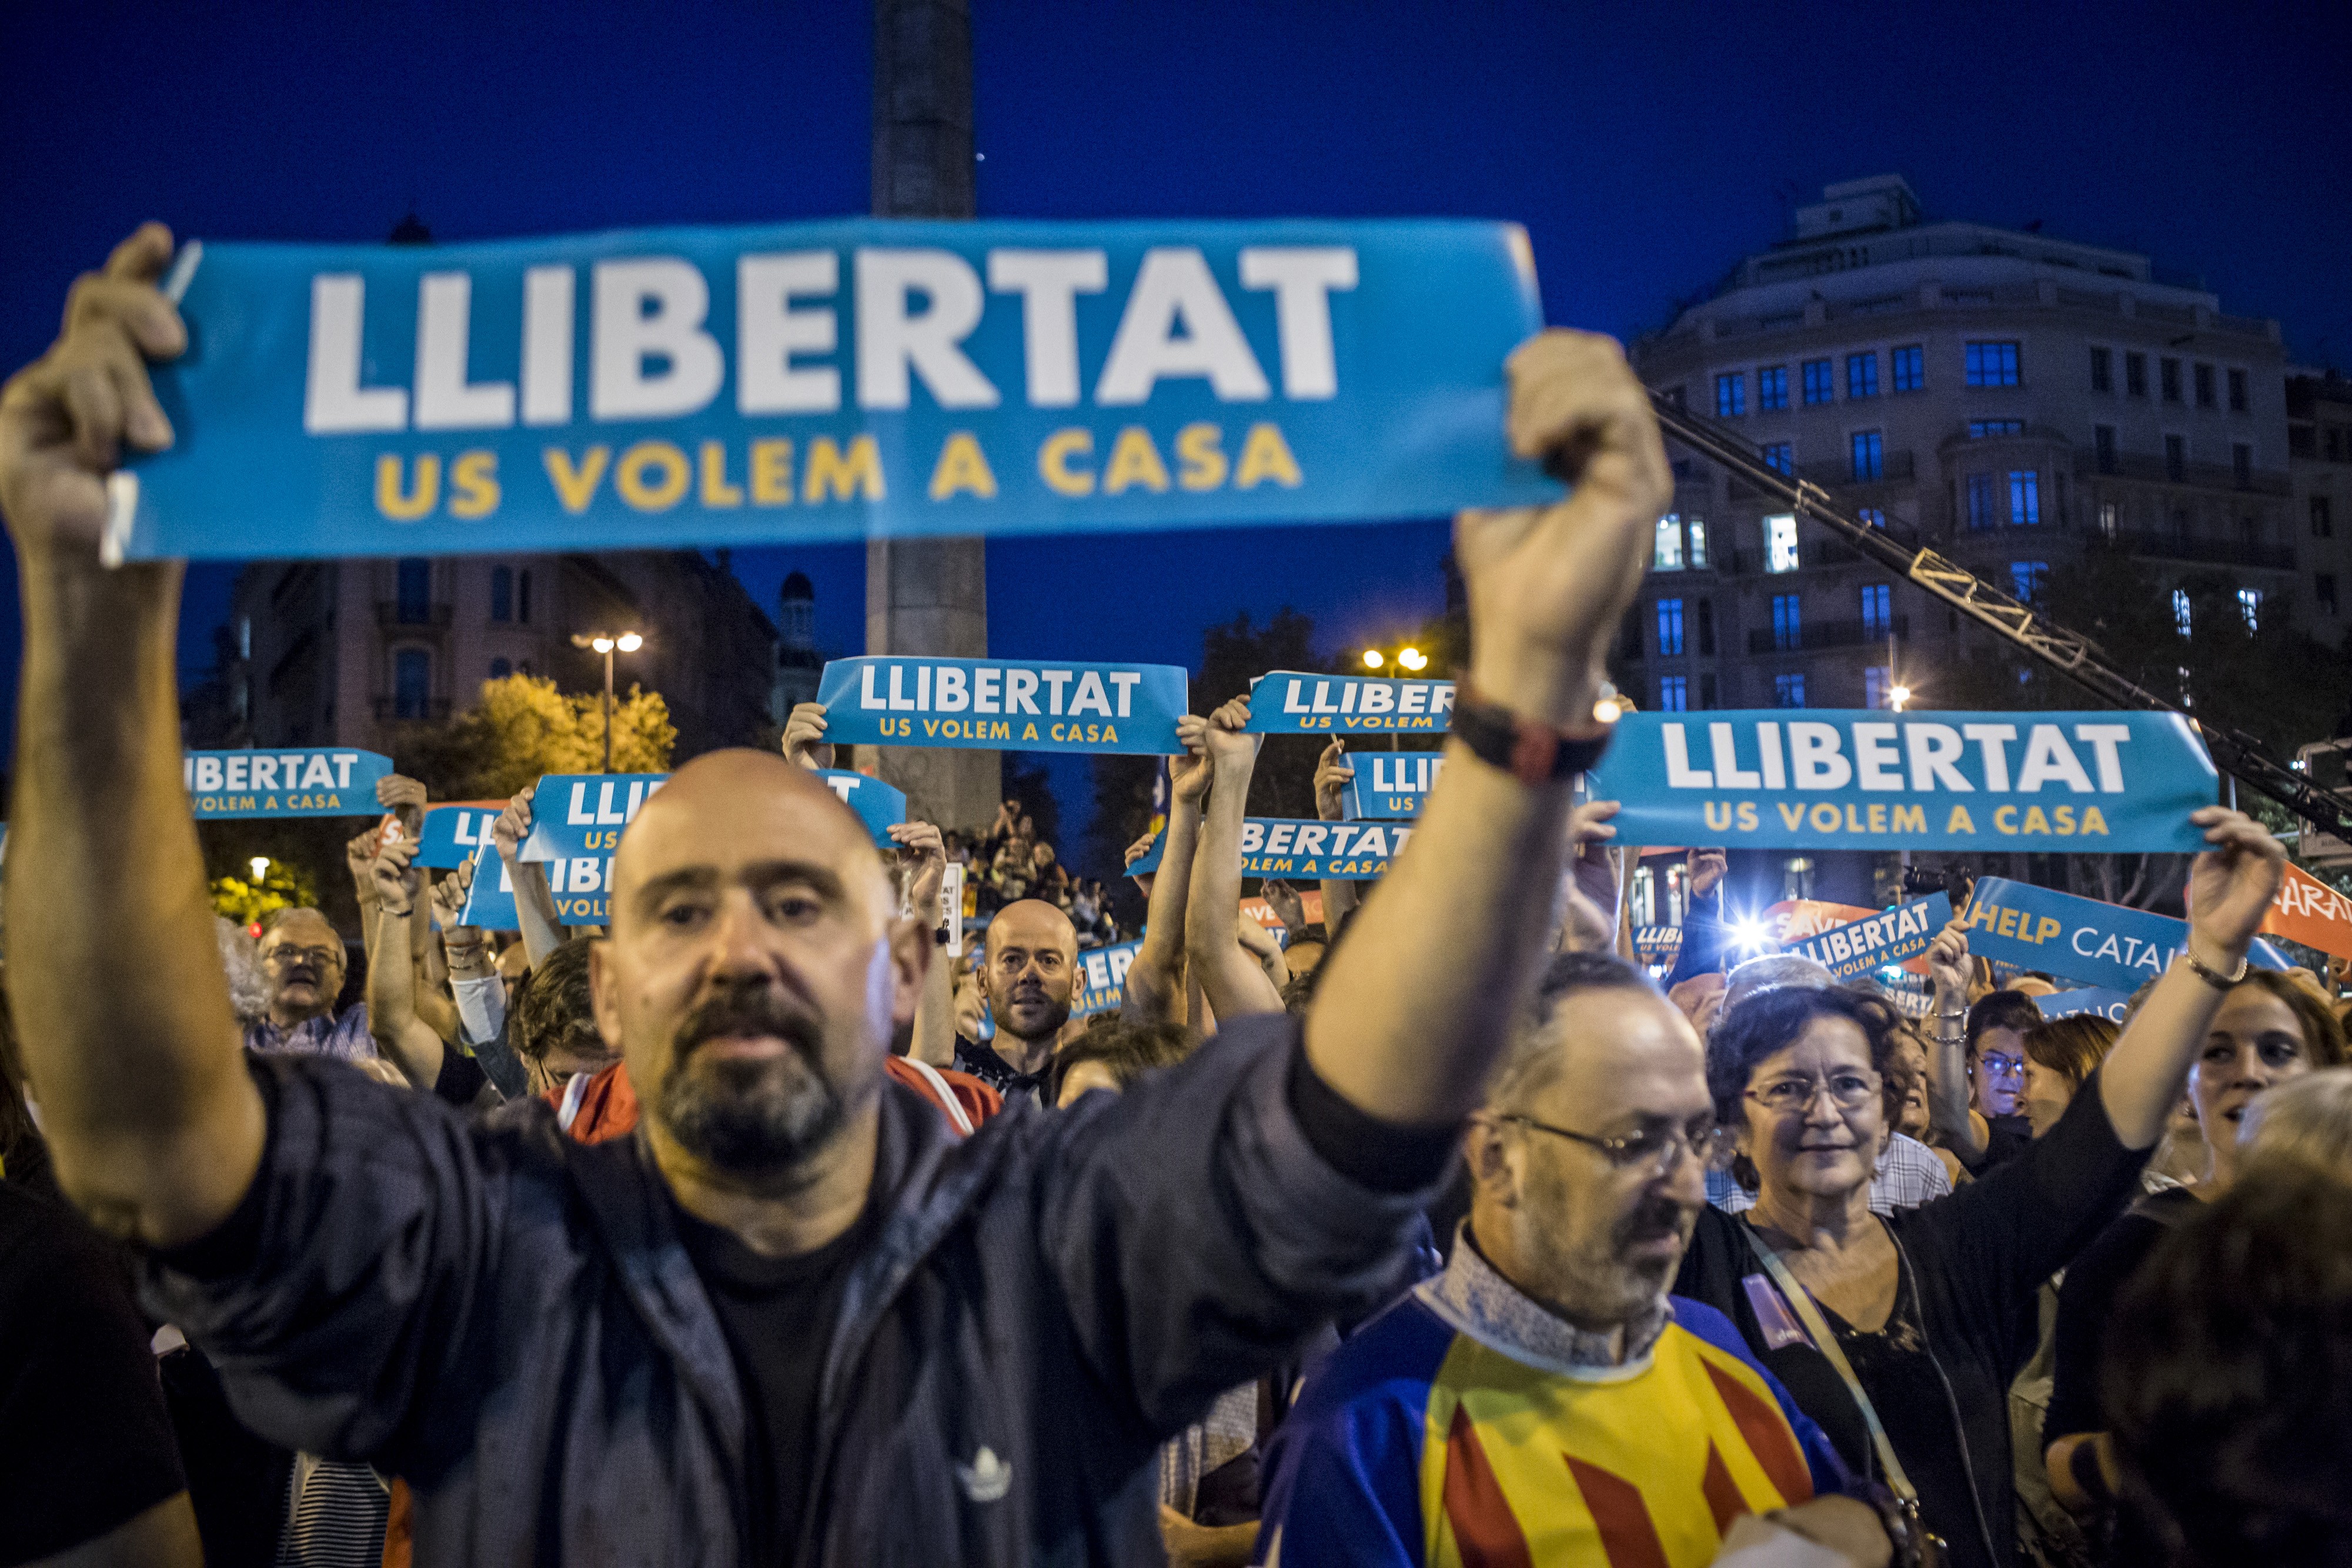 Protesters hold up banners reading “Help Catalonia” during a candlelight vigil to demand the release of imprisoned separatist leaders Jordi Sanchez, head of the Catalan National Assembly, and Jordi Cuixart, head of the Omnium Cultural association, in Barcelona, Spain, on October 17. Photo: Bloomberg